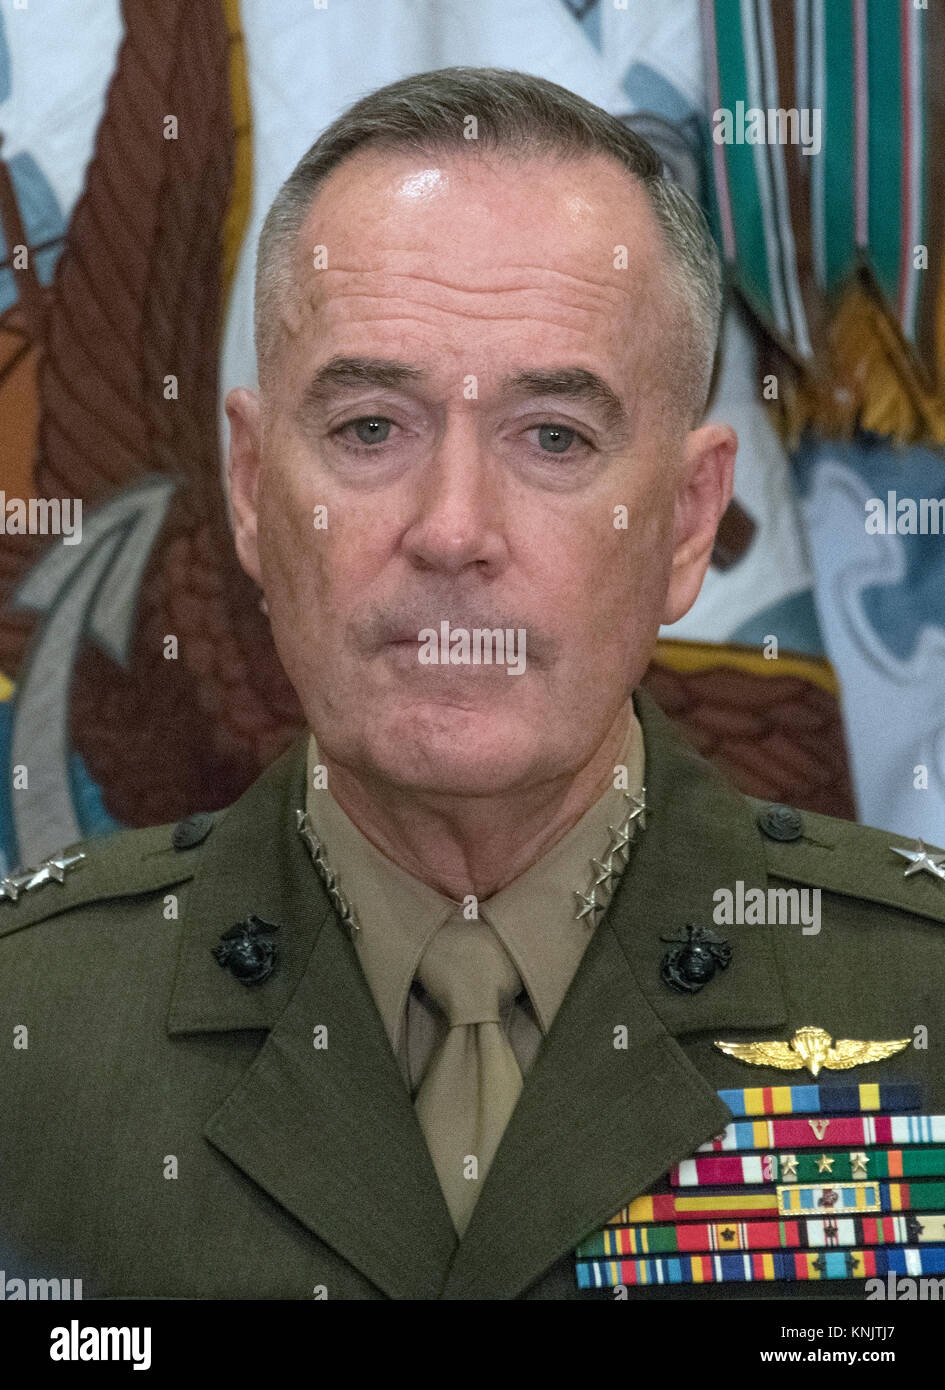 United States Marine Corps General Joseph F. Dunford Jr., Chairman, Joint Chiefs of Staff, looks on as US President Donald J. Trump makes remarks prior to signing H.R. 2810, National Defense Authorization Act for Fiscal Year 2018, in the Roosevelt Room of the White House in Washington, DC on Tuesday, December 12, 2017. Credit: Ron Sachs/CNP /MediaPunch Stock Photo